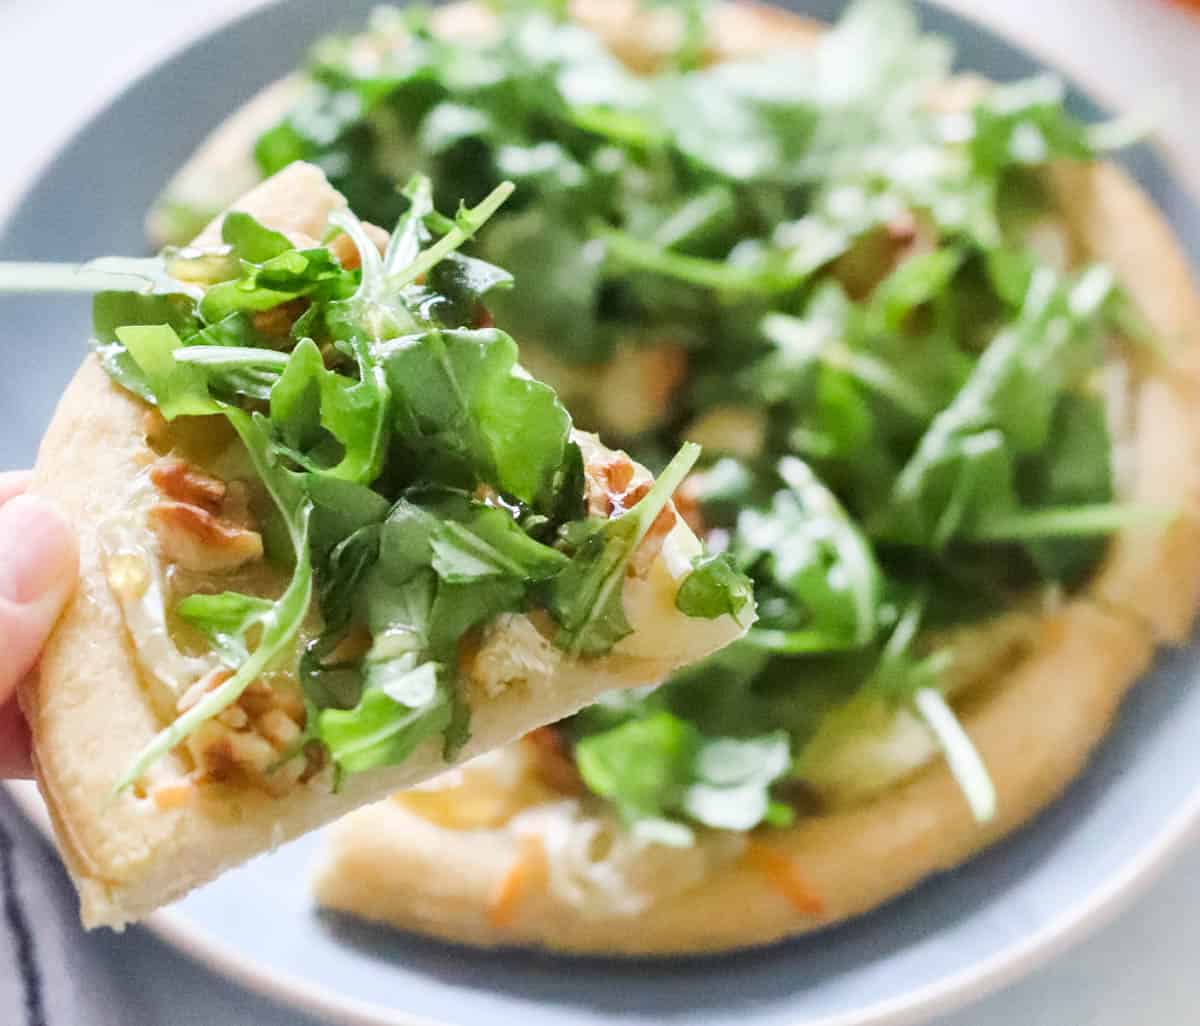 hand holding a piece of pizza topped with walnuts and arugula with a plate of pizza in background